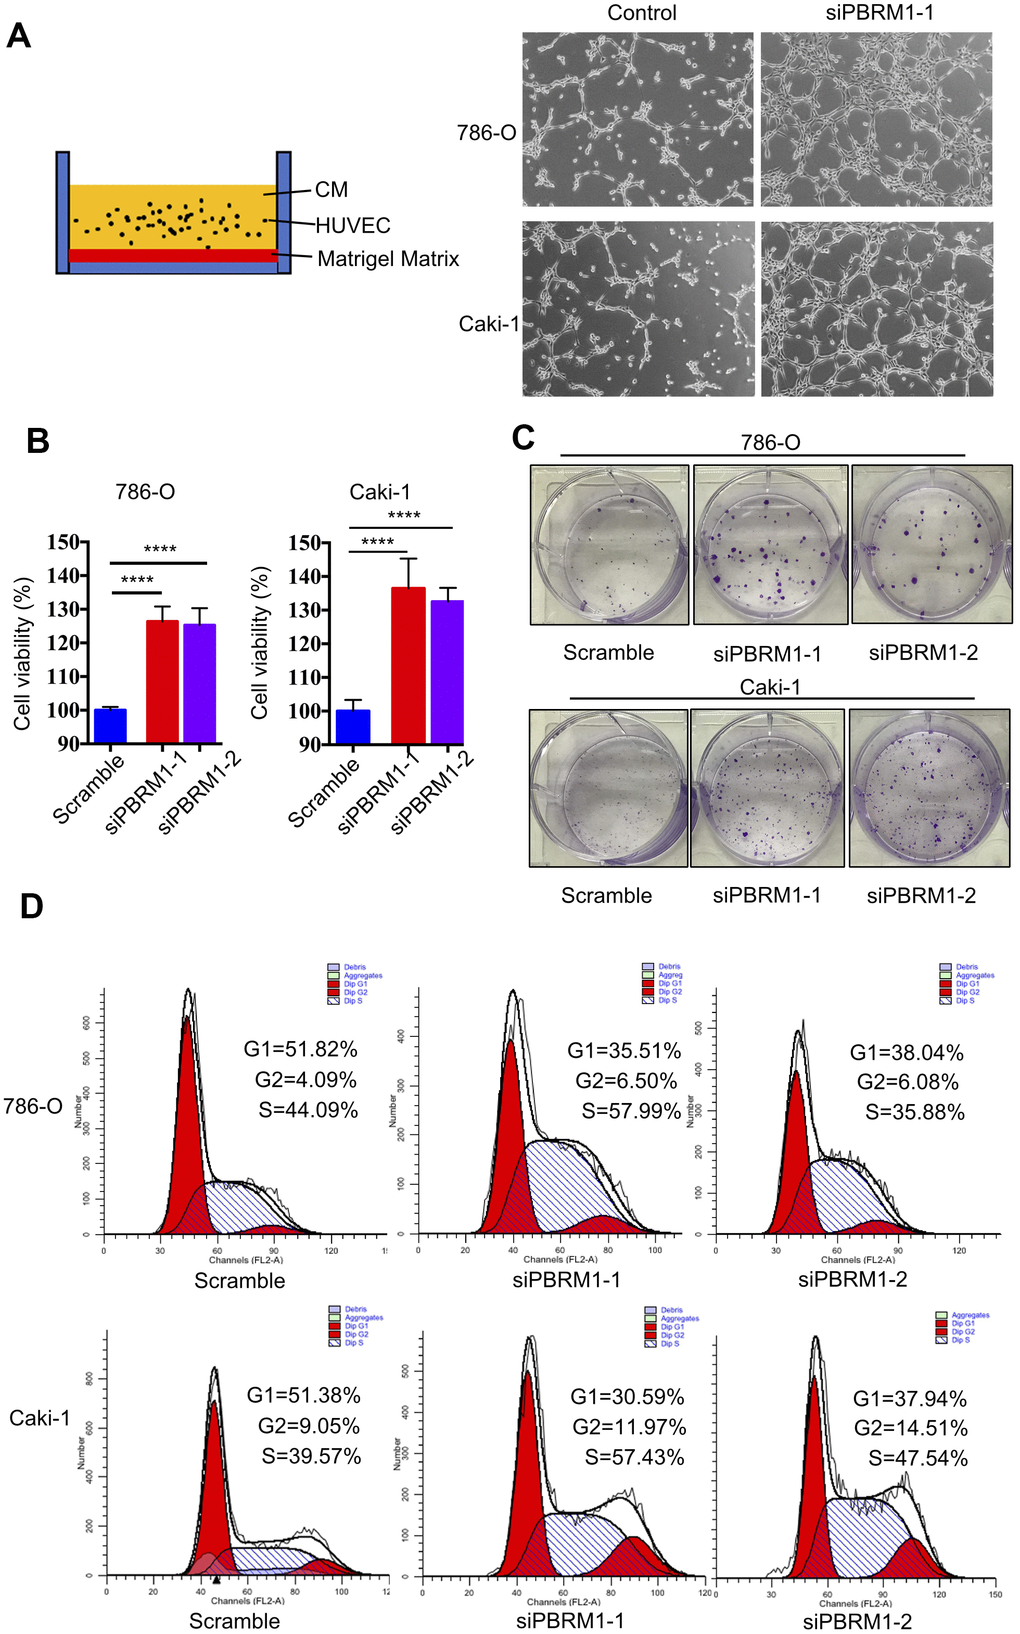 PBRM1 silencing enhances tumor angiogenesis and promotes cell proliferation of RCC cells in vitro. (A) Matrigel tube formation assay results show the tube-like structures formed in the matrigel by CM from control and PBRM1-silenced 786-O and Caki-1 cells. (B) MTT assay results show viability of control and PBRM1-silenced 786-O and Caki-1 cells. (C) The colony formation assay results show the total numbers of colonies formed by control and PBRM1-silenced 786-O and Caki-1 cells based on crystal violet staining. (D) Flow cytometry analysis shows the percentage of G1, S, and G2-M cells in control and PBRM1-silenced 786-O and Caki-1 cells based on PI staining. Note: The experiments were performed in triplicate and data are represented as means±SD; the statistical analysis was performed using Student’s t-test.